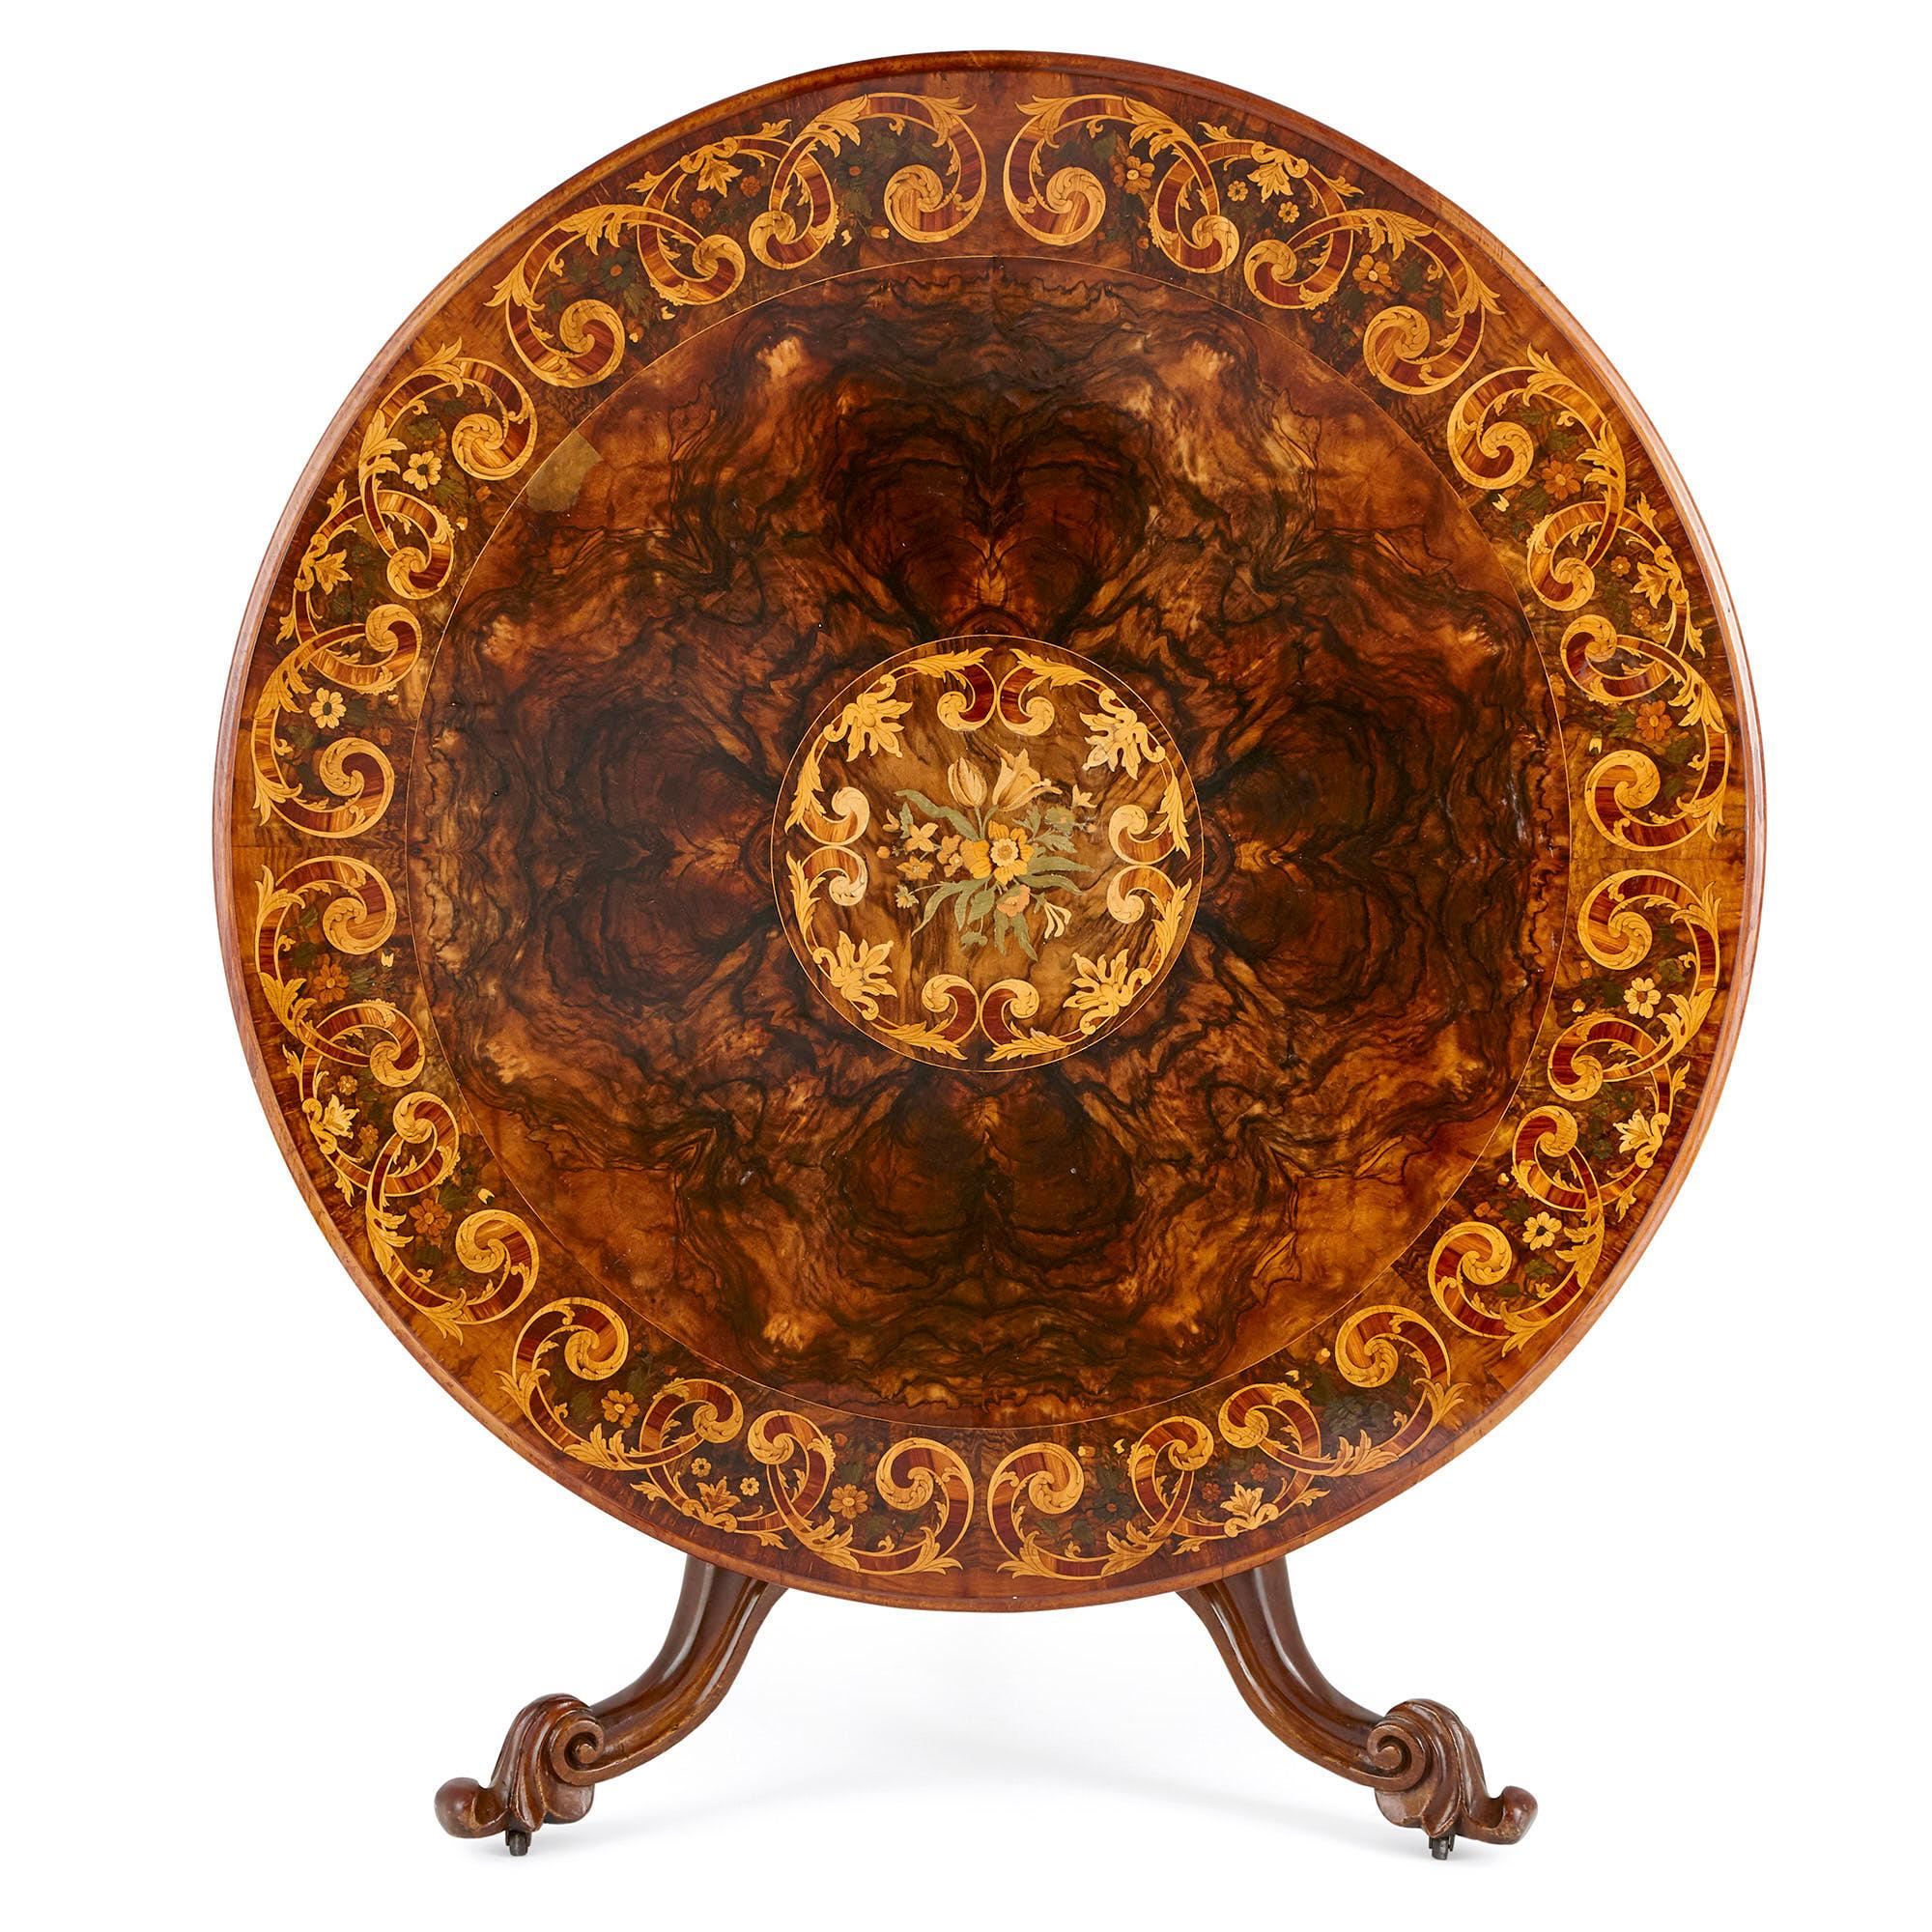 This wonderful breakfast table was crafted in England in circa 1870, during the reign of Queen Victoria.

The item is notable for its large circular top which is decorated with beautiful marquetry work. This includes a central medallion which